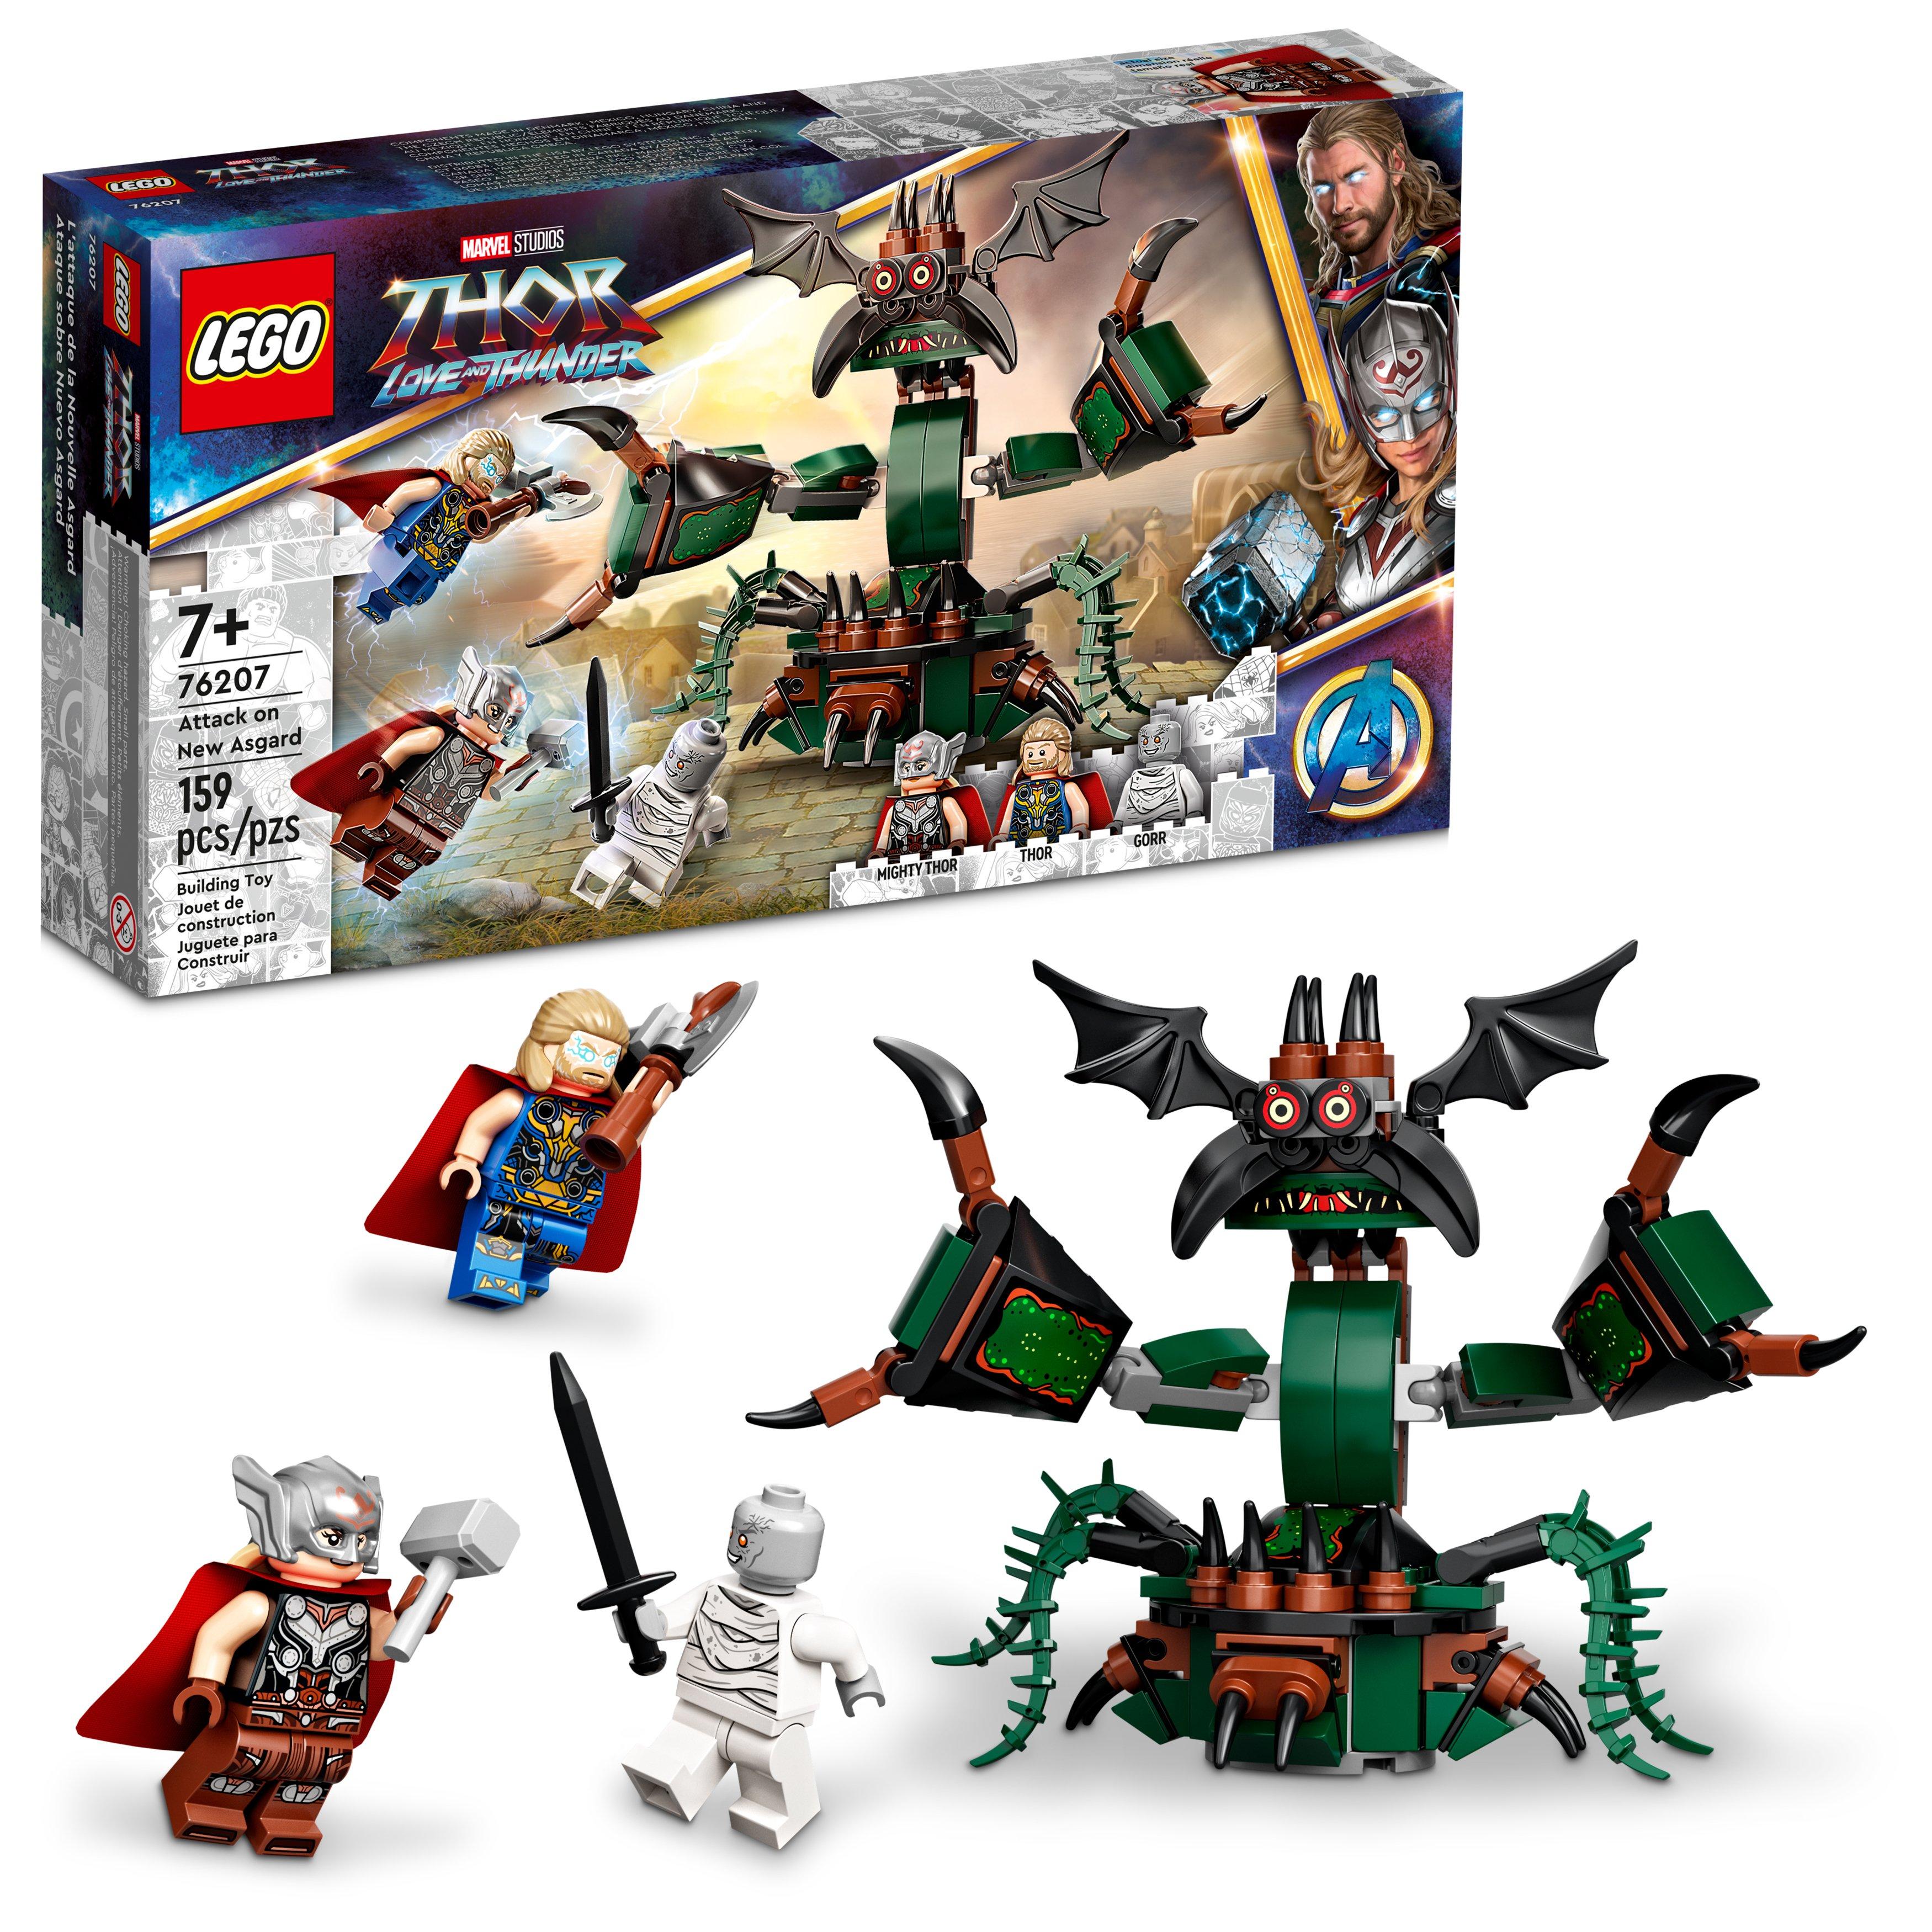 list item 1 of 8 LEGO Super Heroes Thor: Love and Thunder Attack on New Asgard 76207